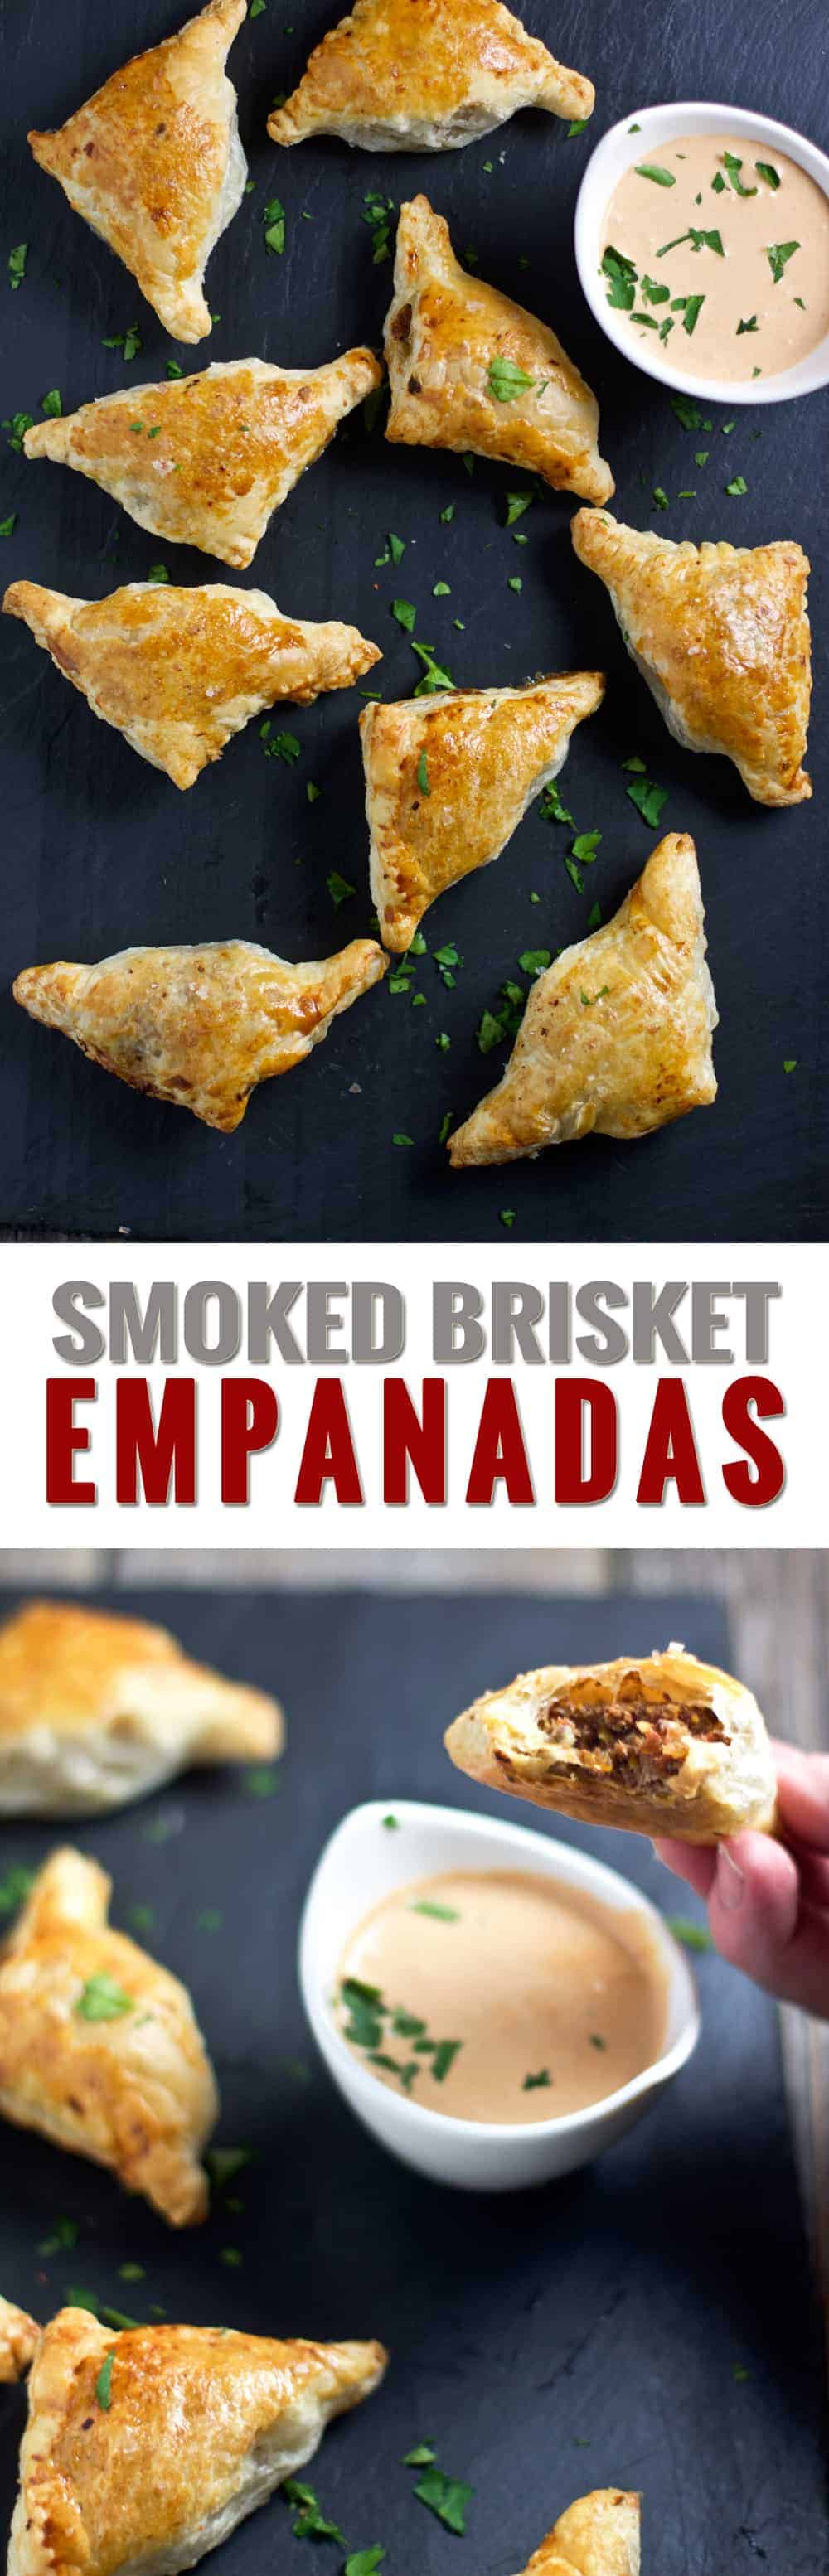 Smoked Brisket Empanadas. An incredible use for leftover smoked brisket and awesome appetizer idea for the holidays. Smoked brisket, sautéed vegetables, herbs and spices rolled in puffed pastry dough, and served creamy crème fraîche BBQ dipping sauce. So so good. 